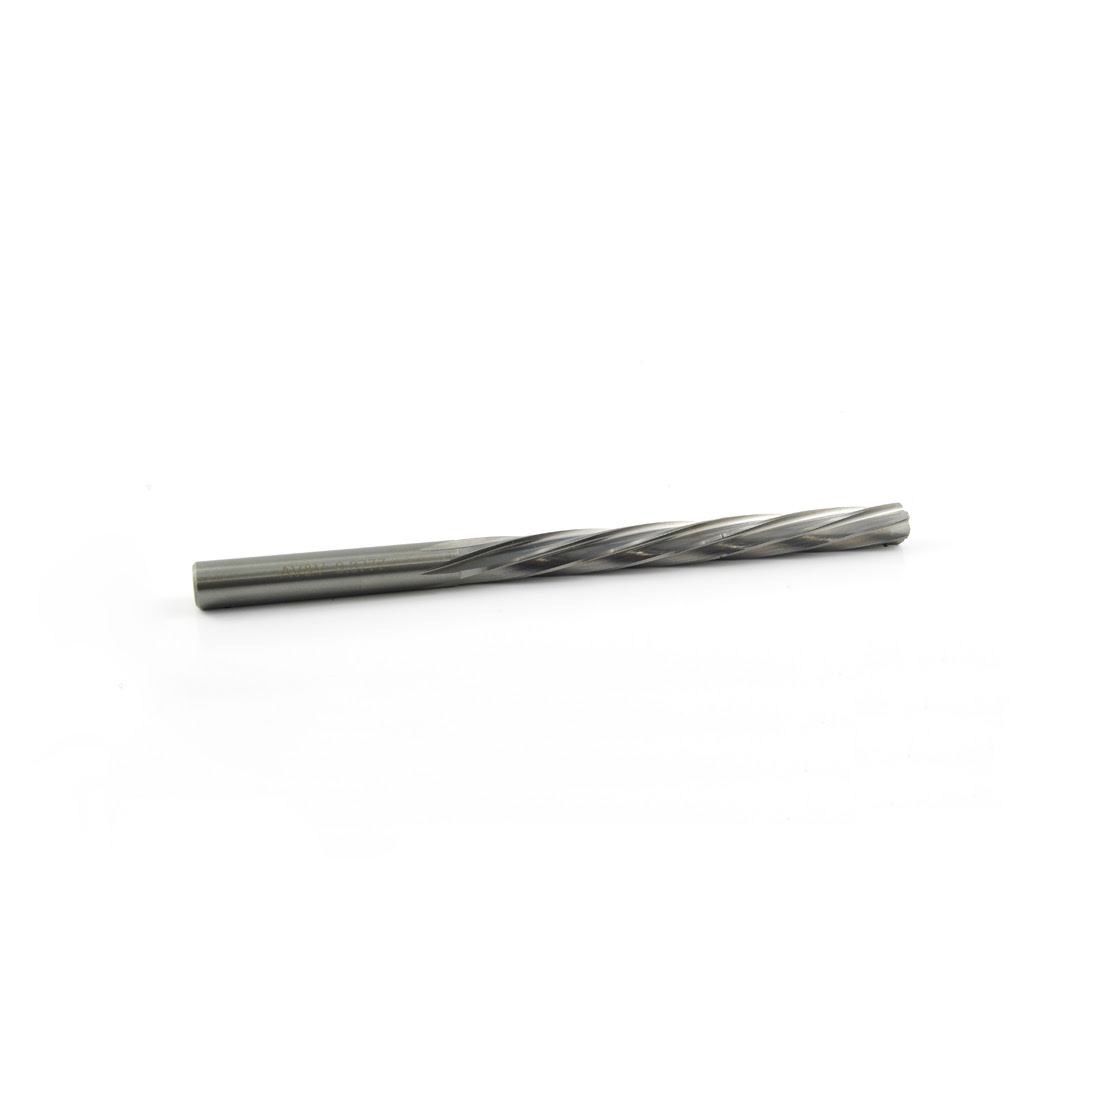 High quality reamers crafted from the finest tool steel and tempered for long life. Tools Solid Carbide Valve Guide Reamers Av V